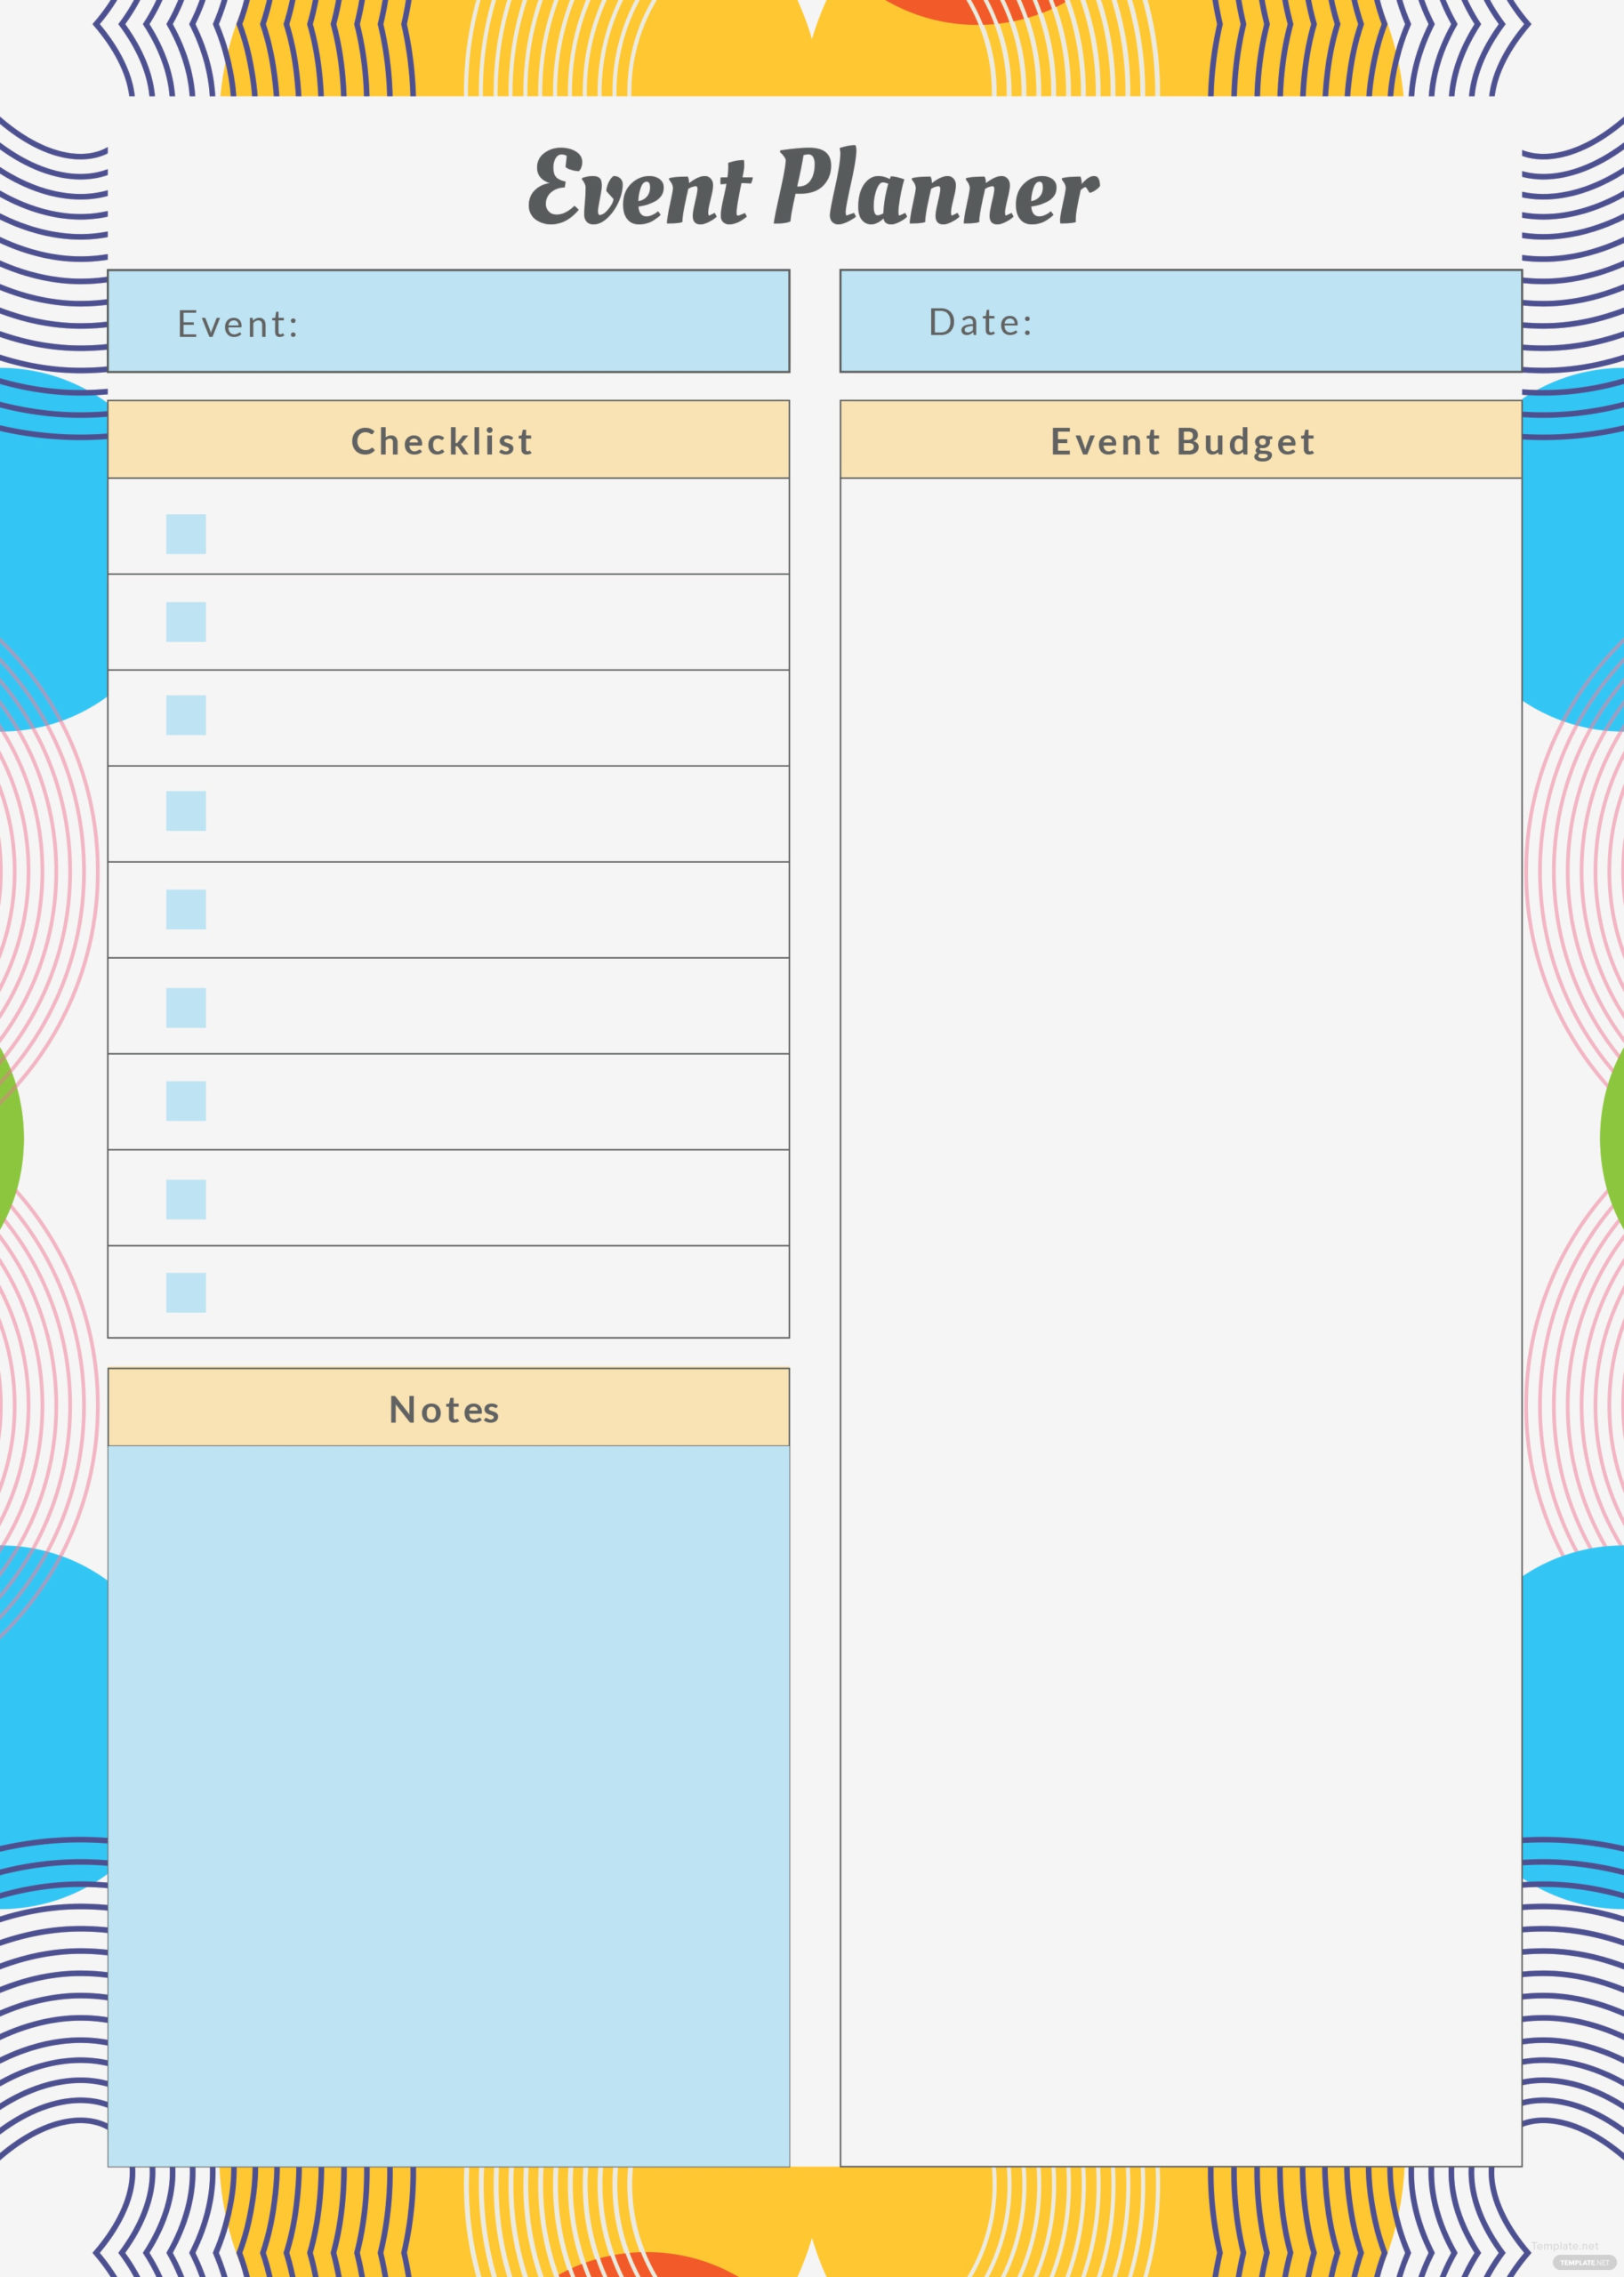 Free Event Planner Template In Adobe Photoshop With Awesome Party Agenda Template